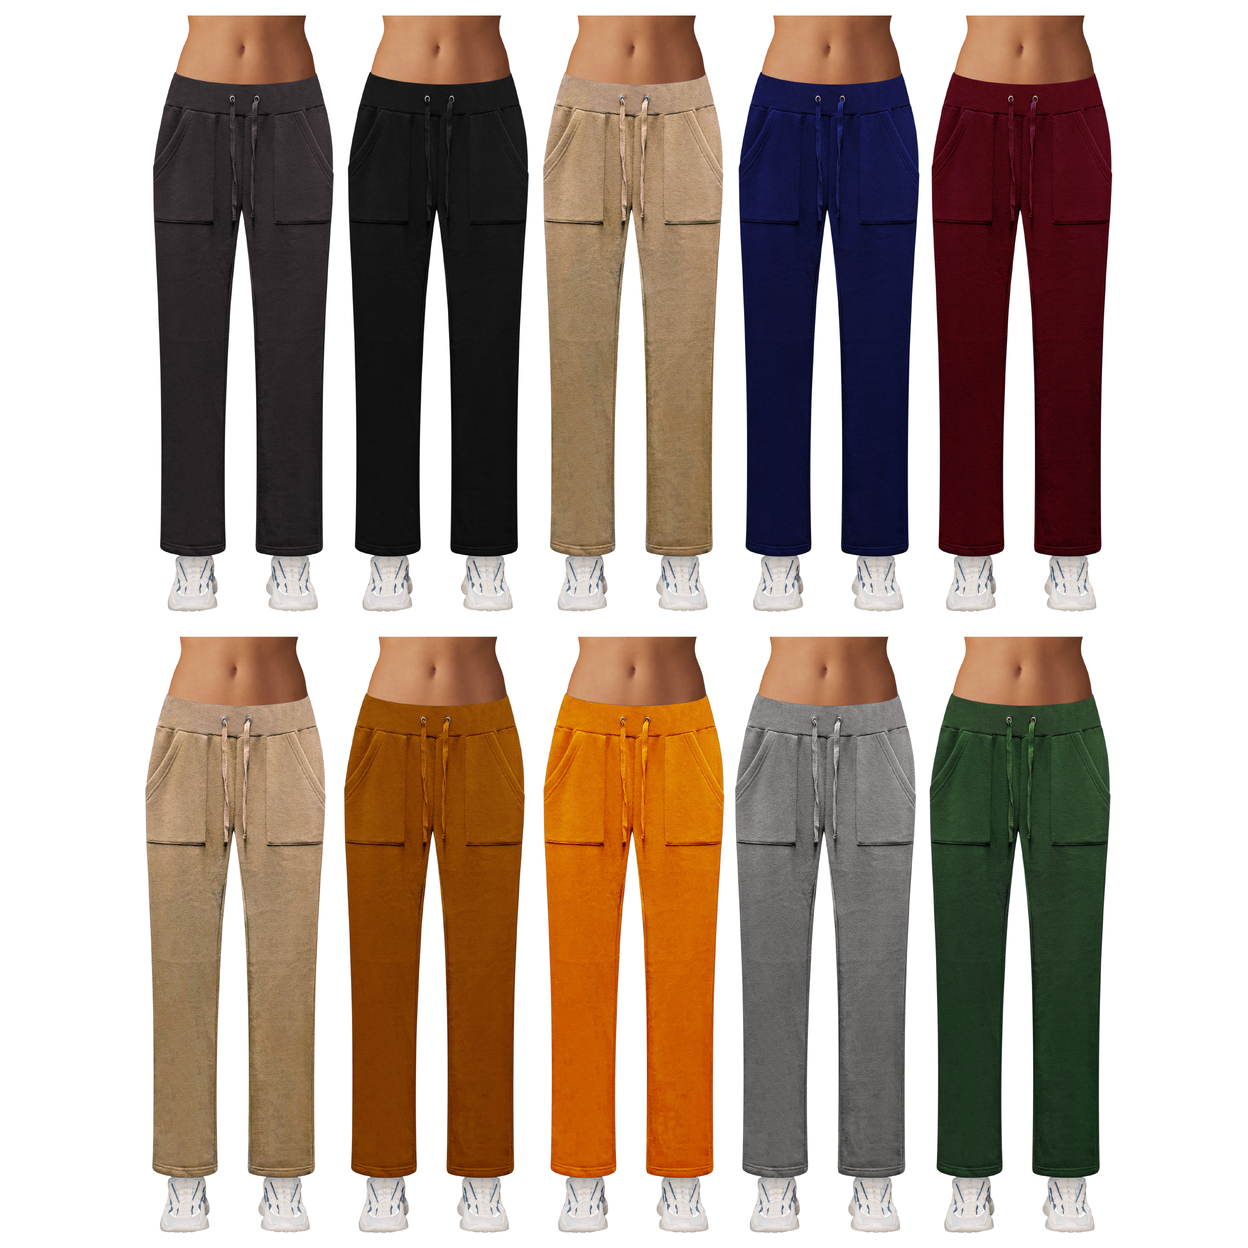 2-Pack: Women's Ultra-Soft Cozy Fleece Lined Elastic Waistband Terry Knit Pants - Assorted, X-large